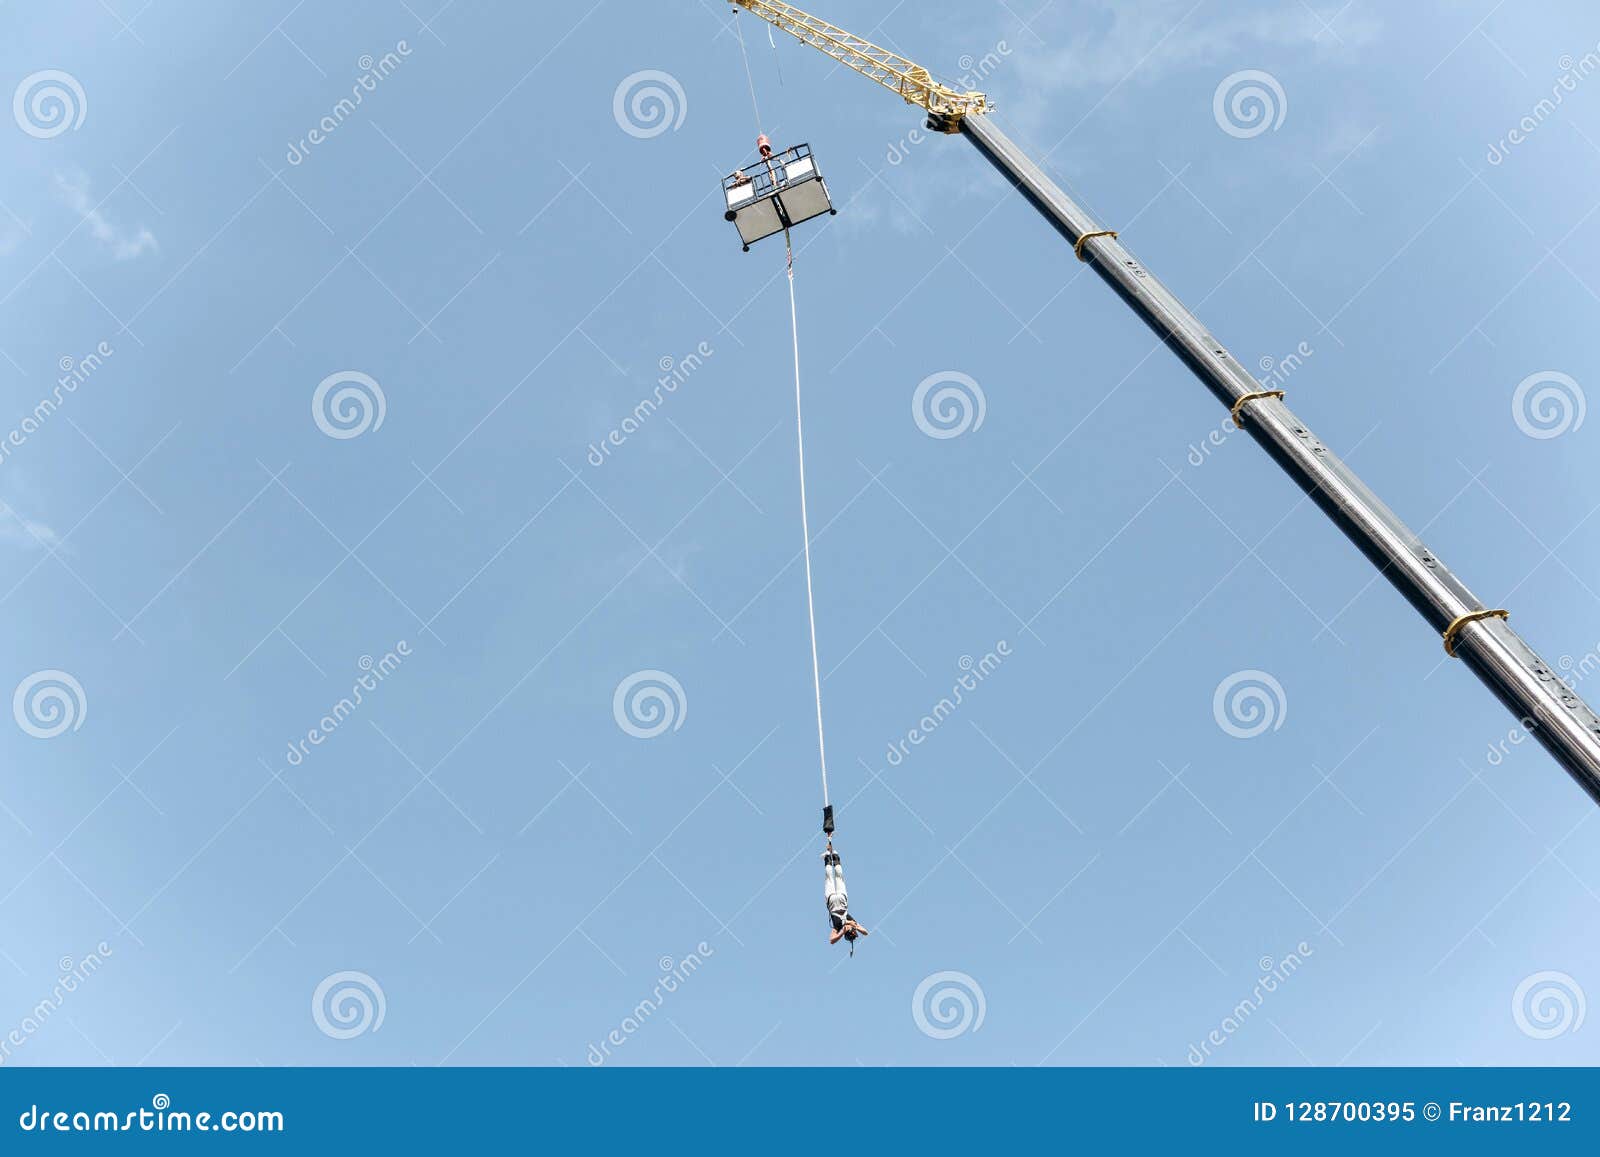 Bungee Jumping with a Crane. Editorial Image - Image of equipment ...